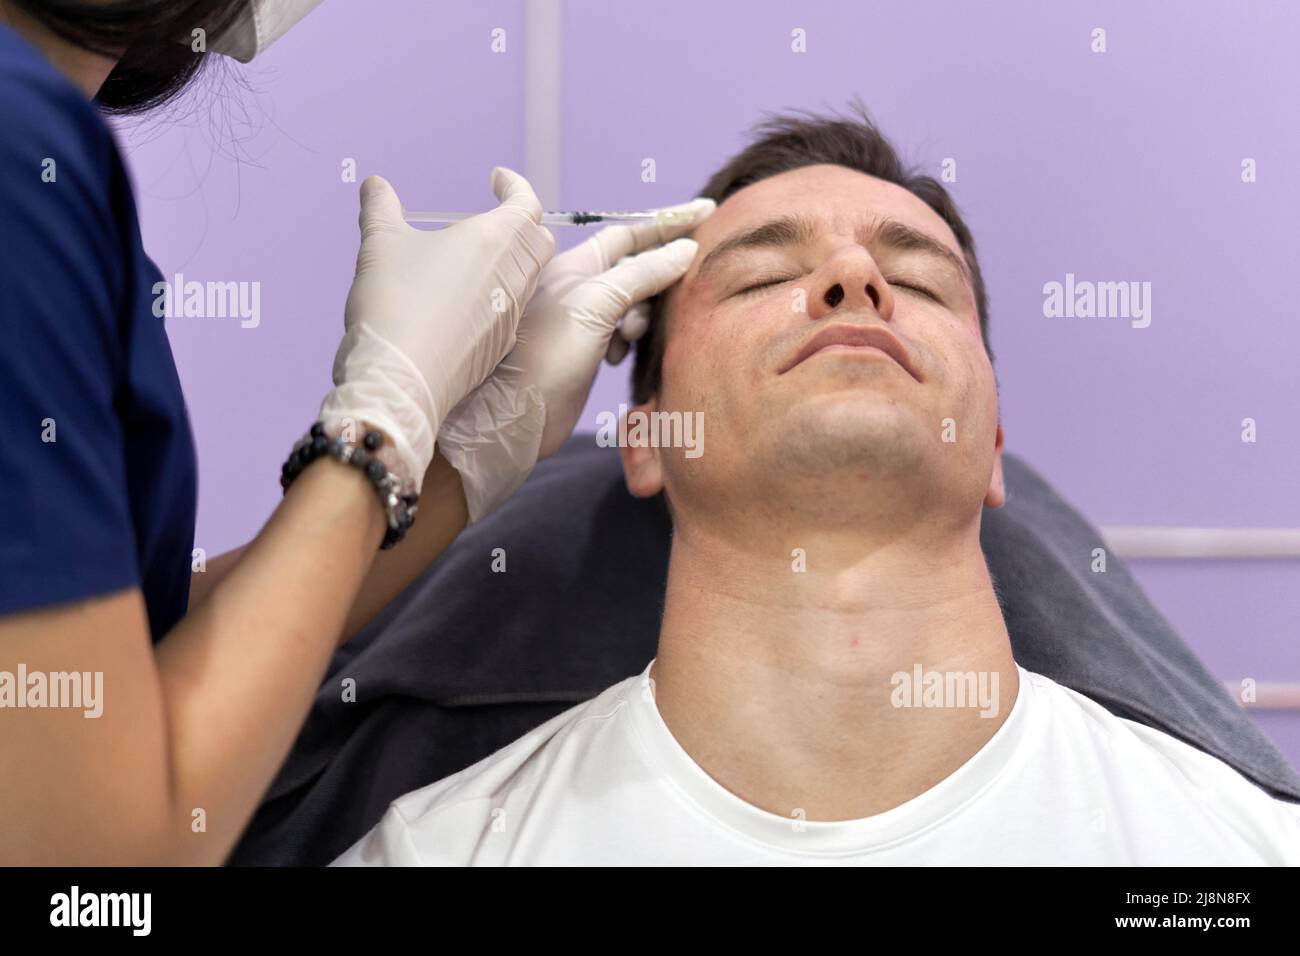 Relaxed patient getting a botox injection for facial rejuvenation treatment Stock Photo